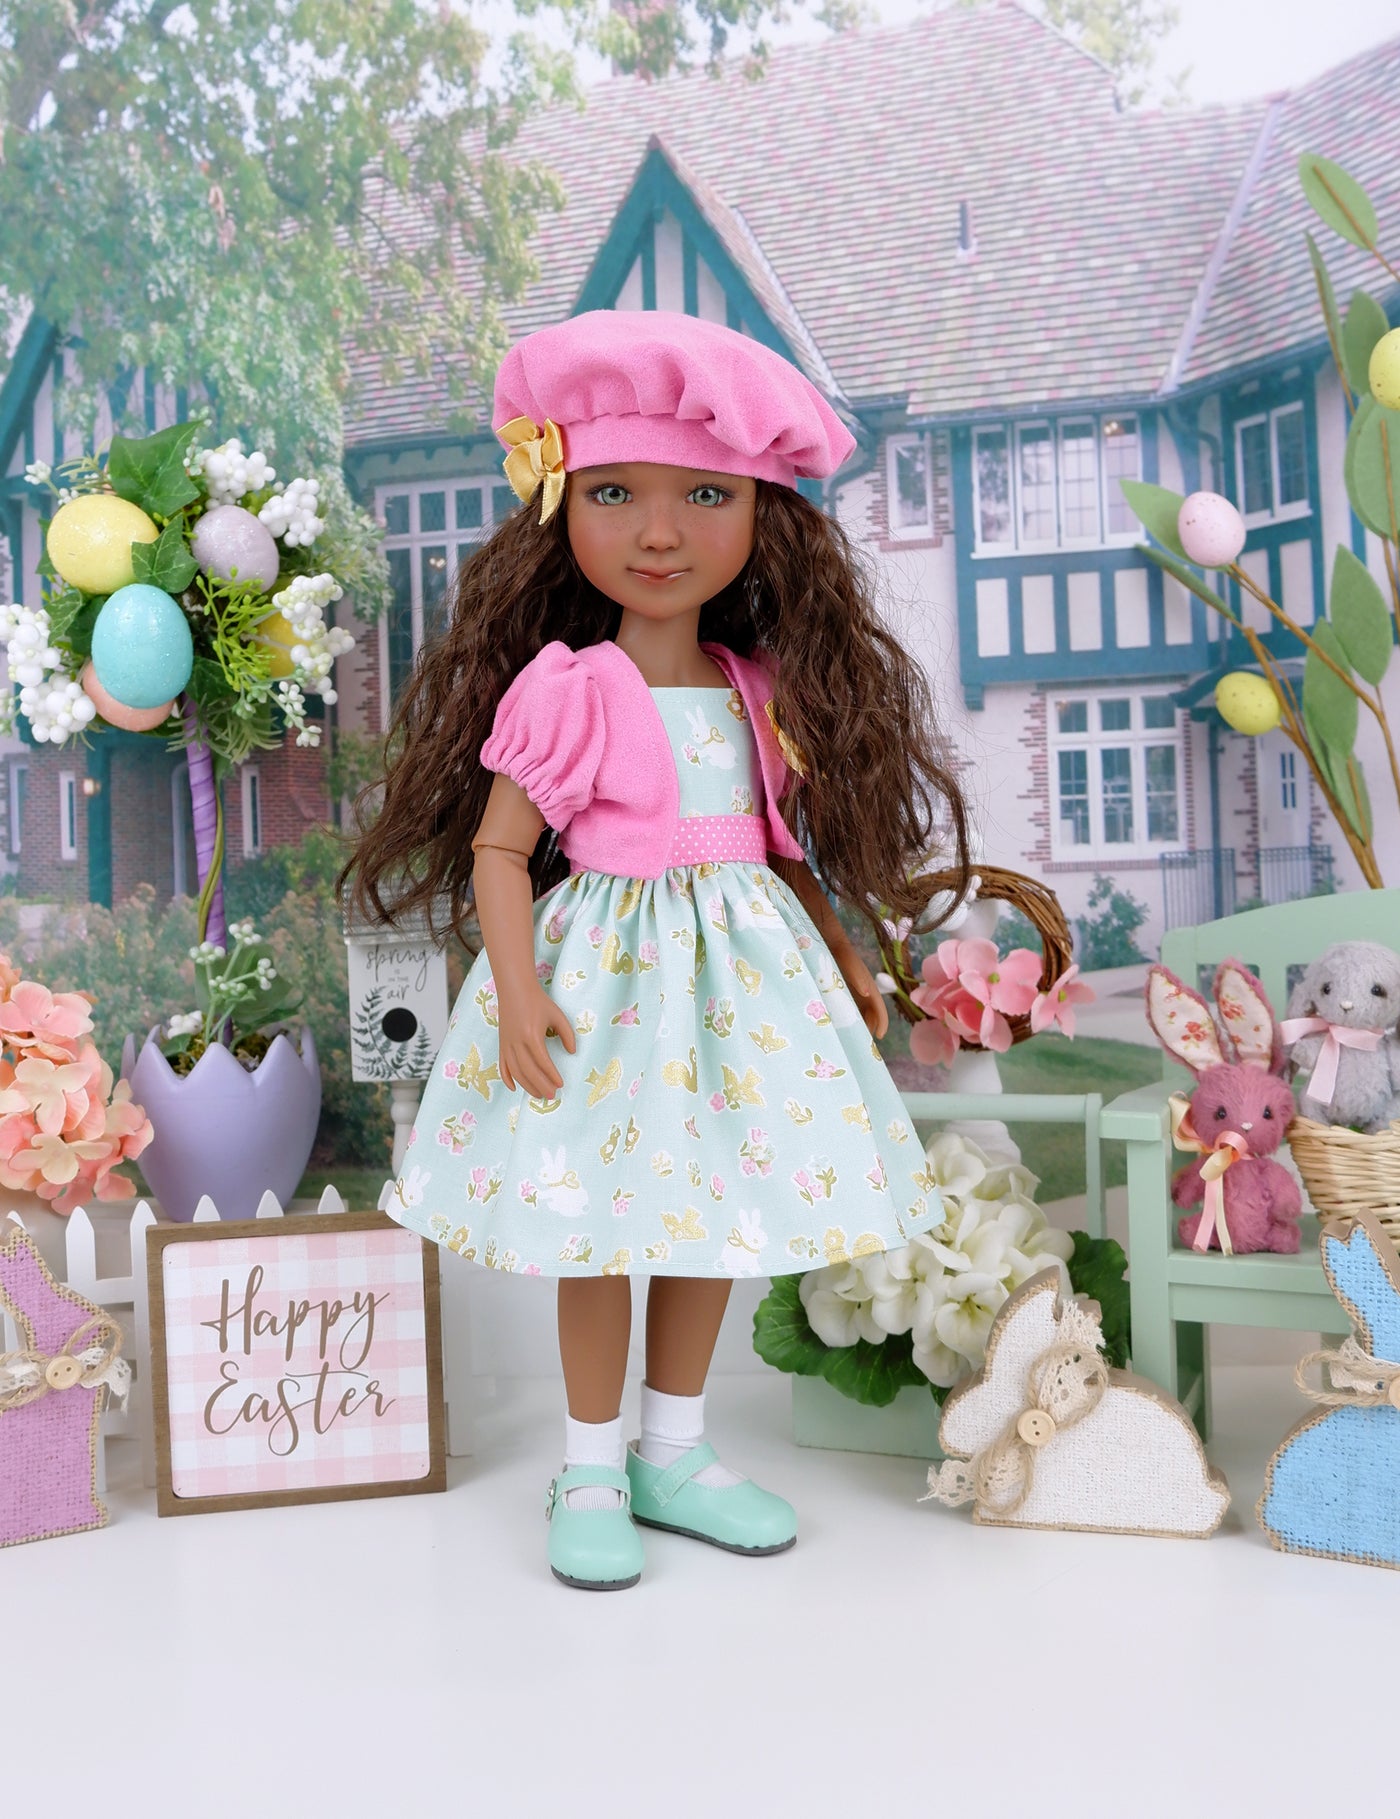 Enchanted Bunny - dress & jacket ensemble with shoes for Ruby Red Fashion Friends doll